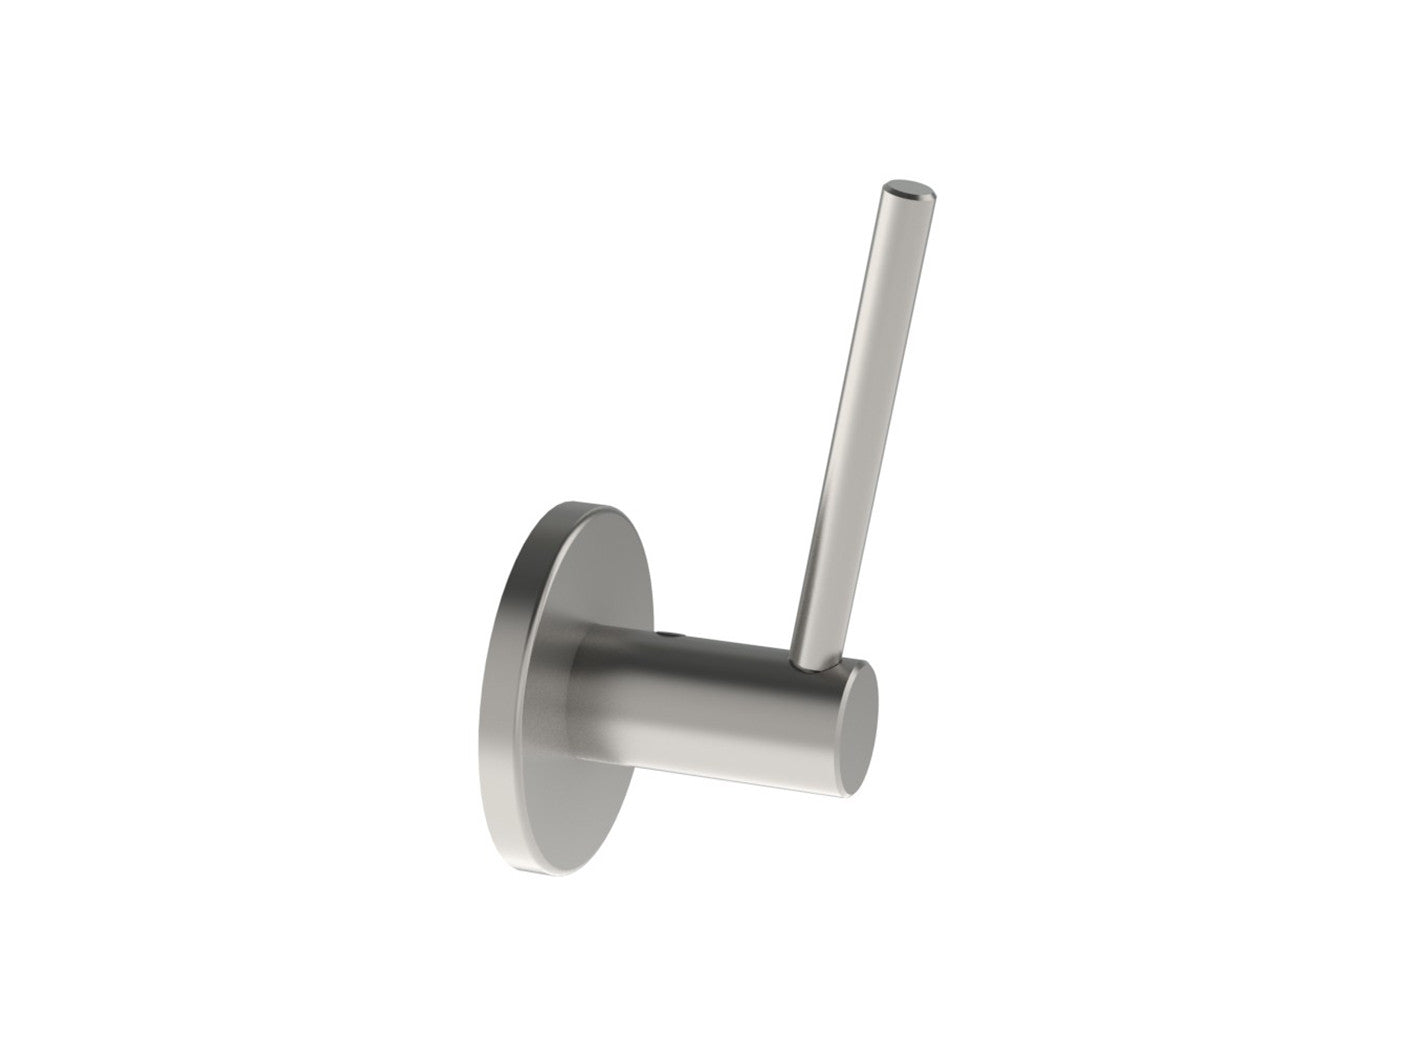 Universal support arm for Walcot House brackets - stainless steel